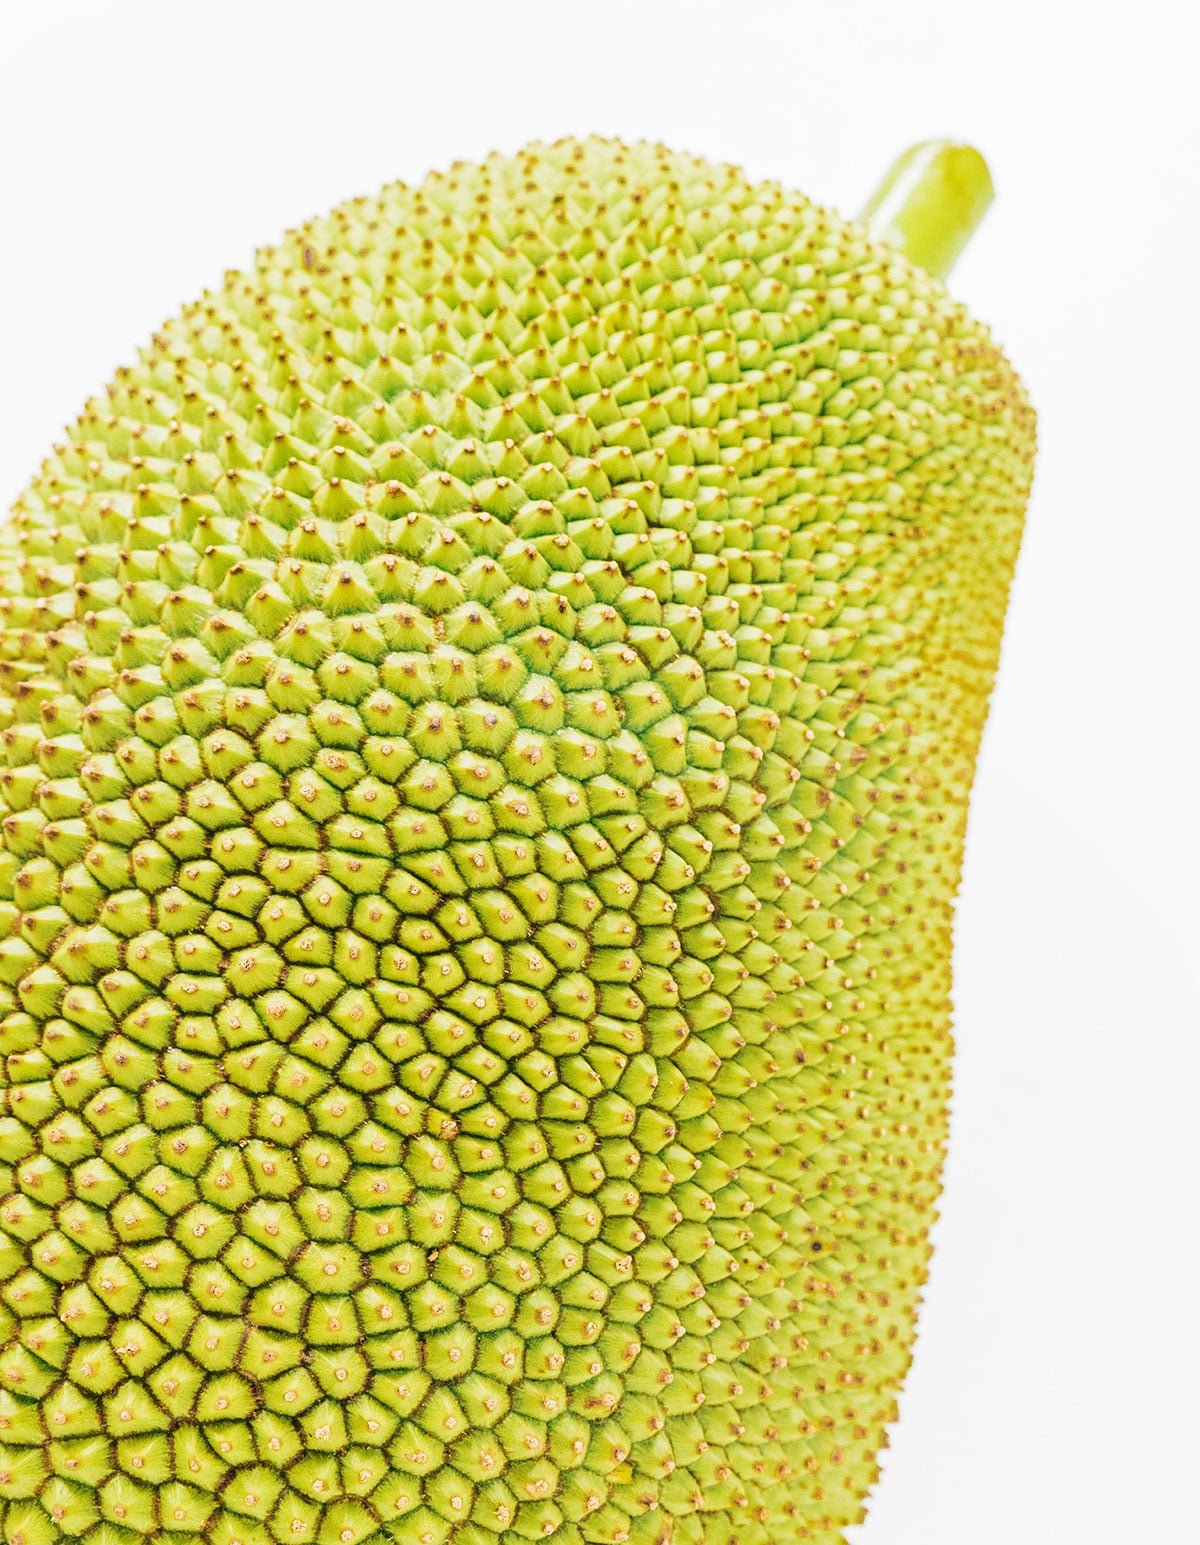 Close up of outer rind of jackfruit that is bumpy and green in color with a geometric pattern.